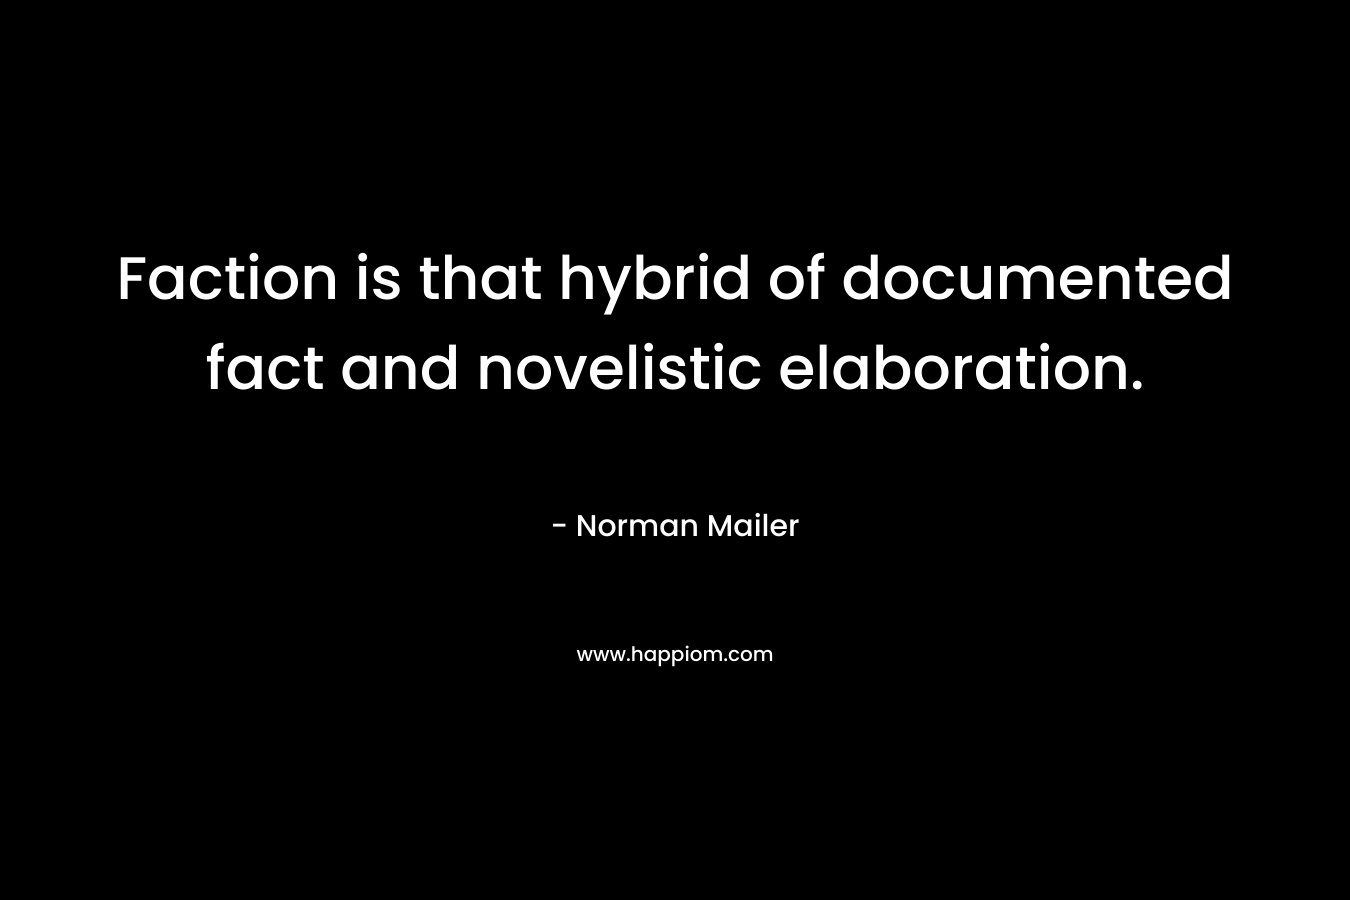 Faction is that hybrid of documented fact and novelistic elaboration. – Norman Mailer